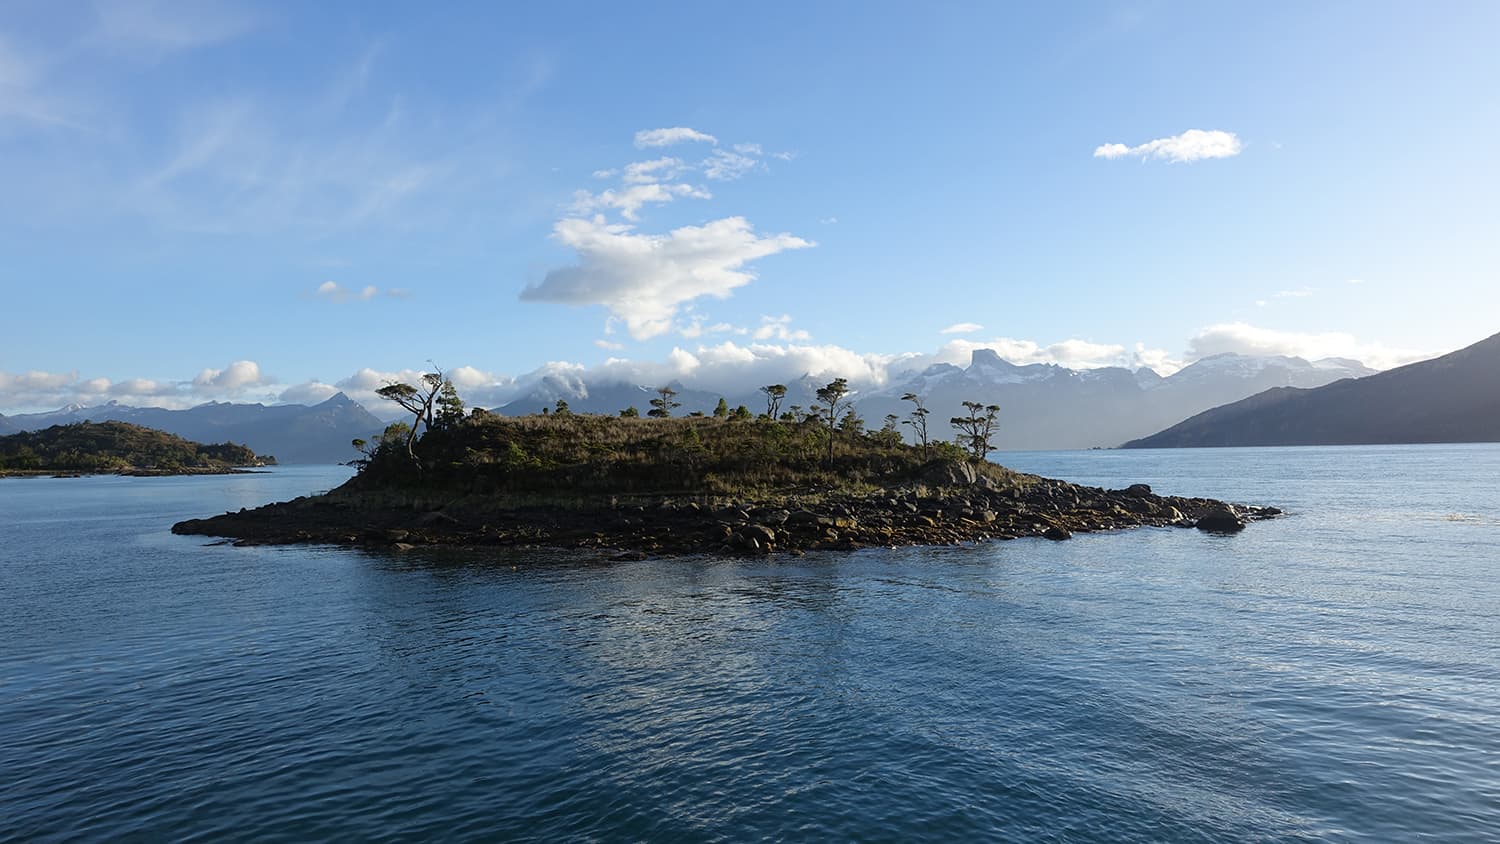 tiny island in the fjords of Tierra del Fuego with snow-capped mountains in the background